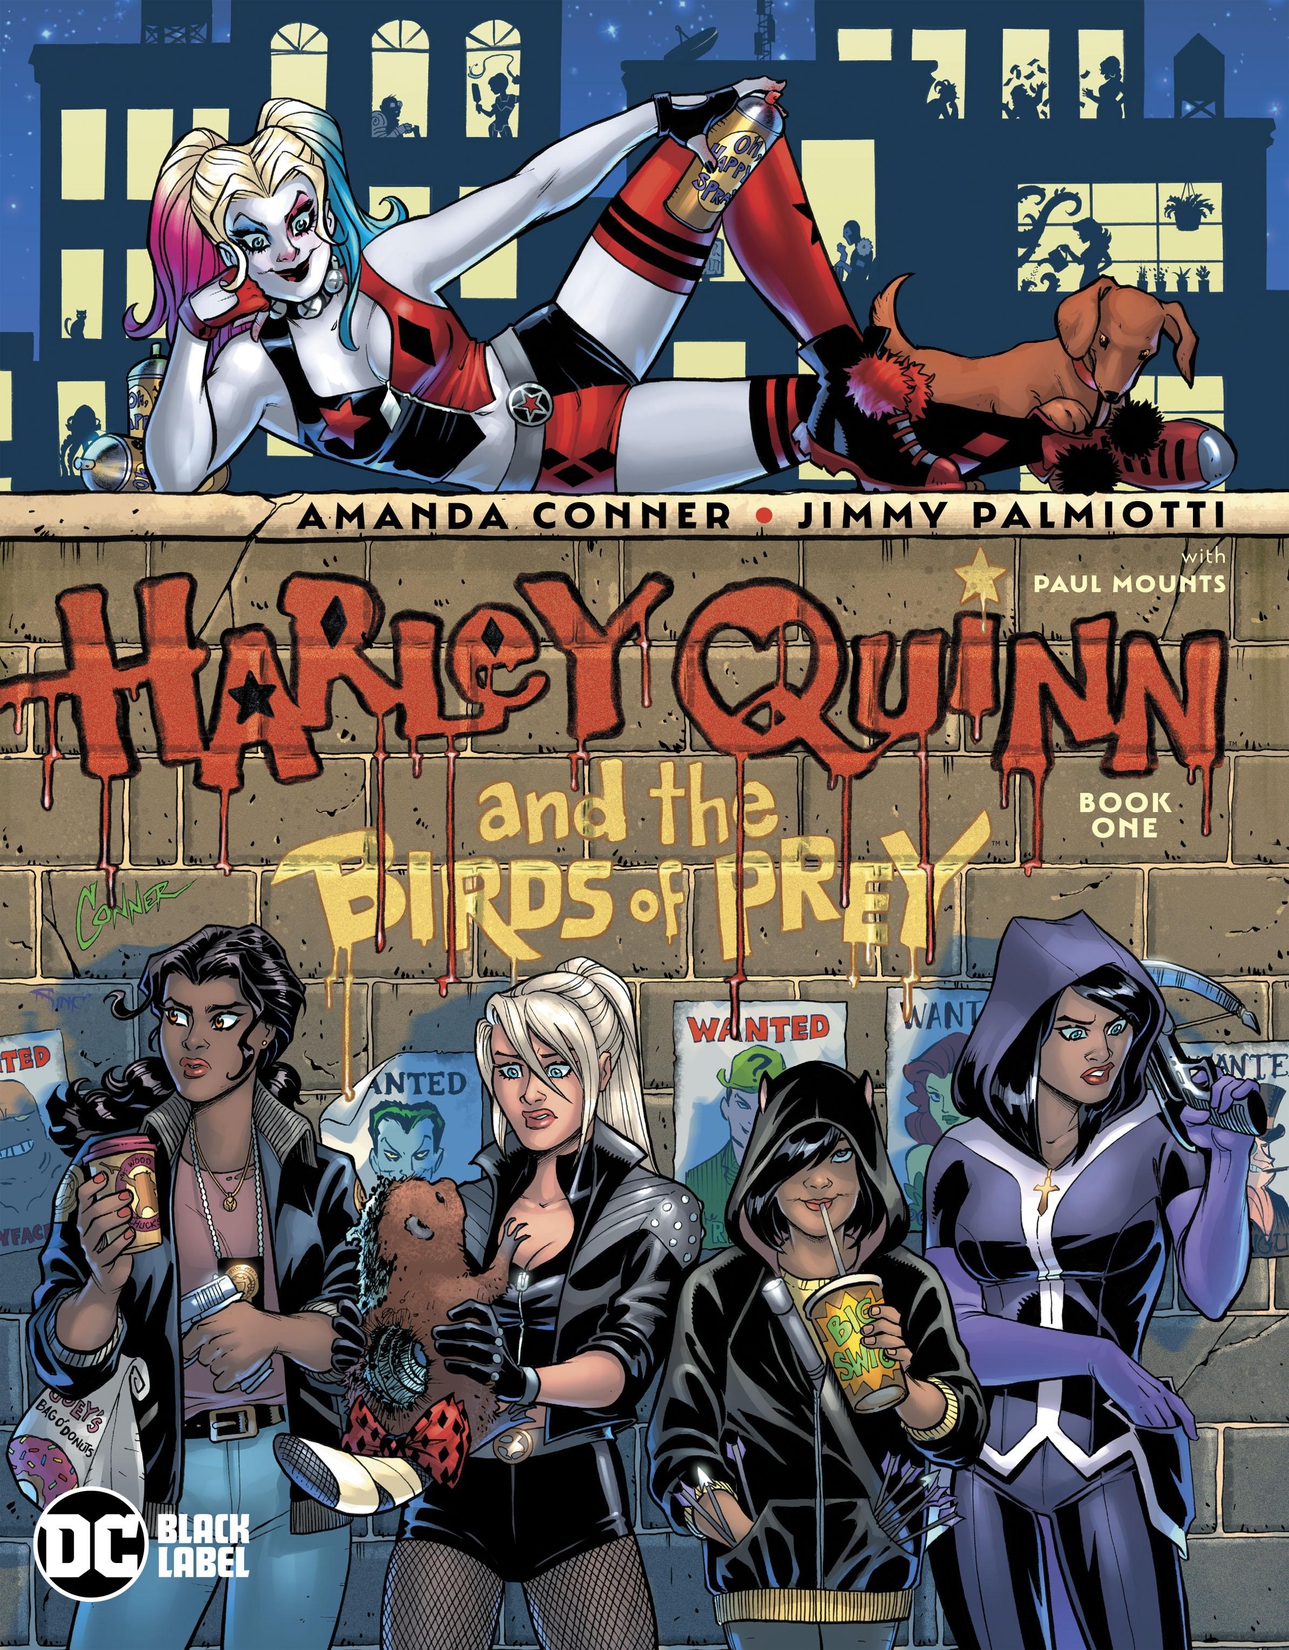 Harley Quinn & the Birds of Prey #1 preview images